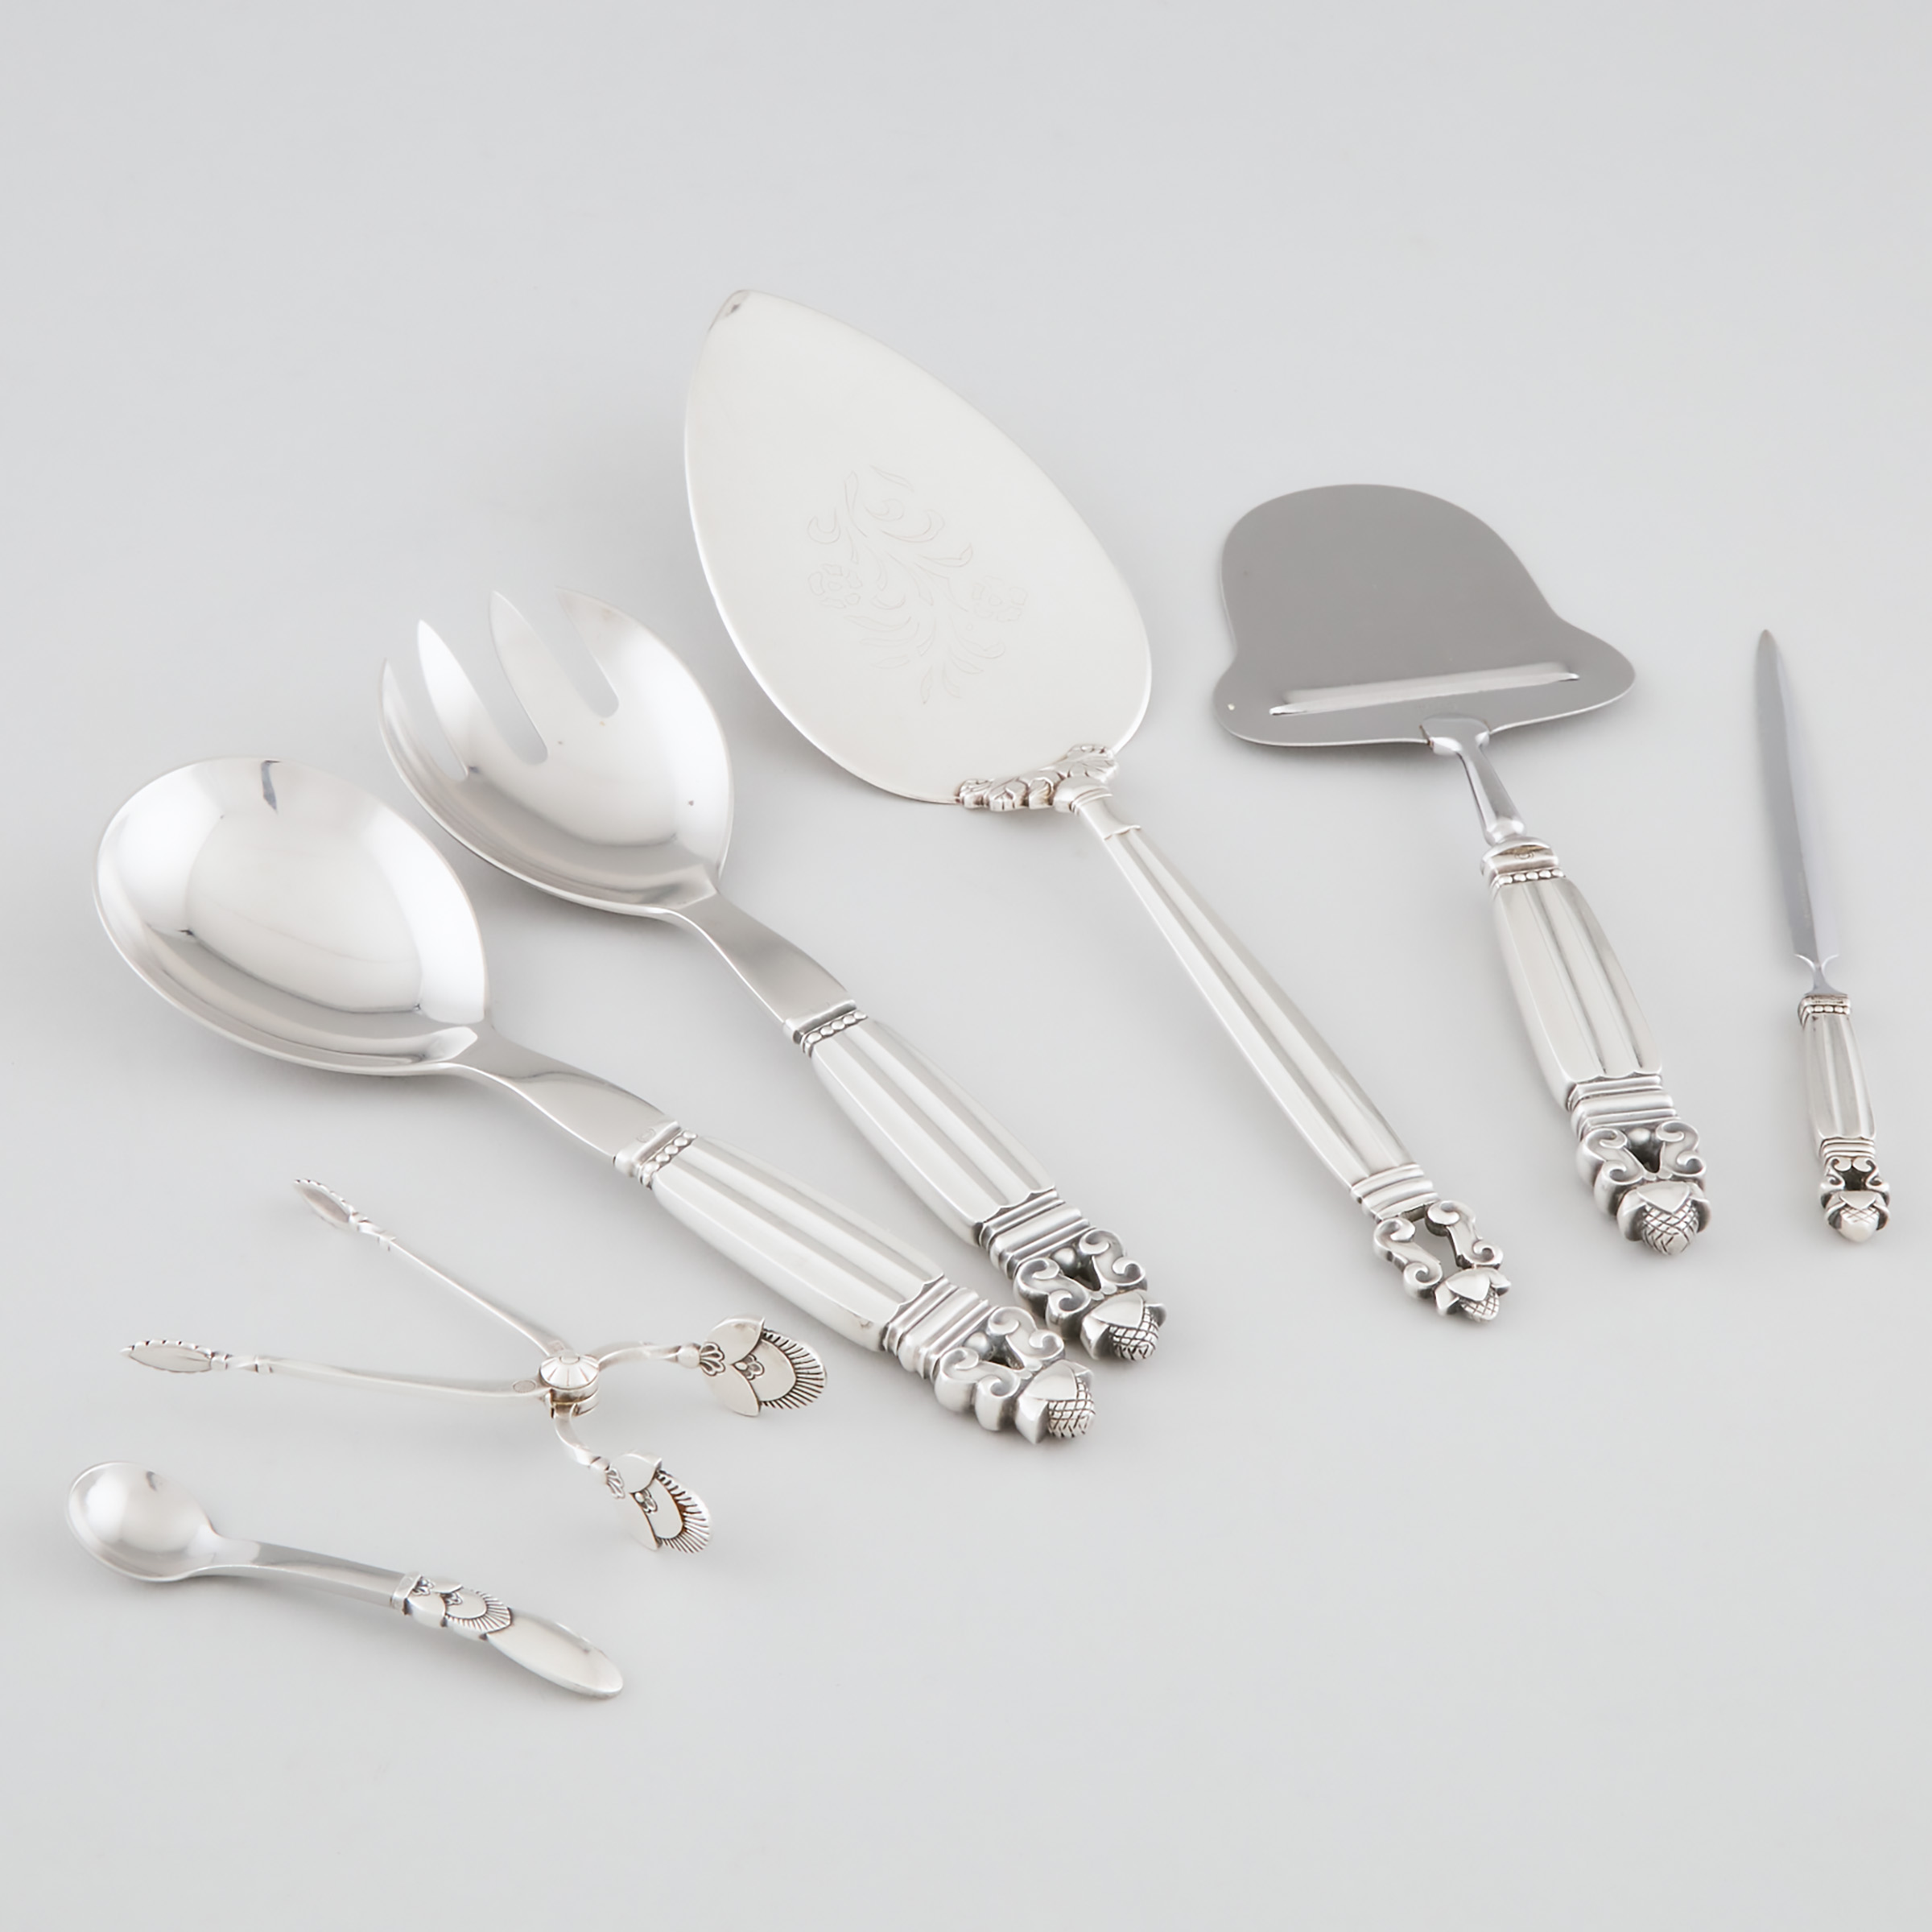 Group of Danish Silver Flatware  2a5670